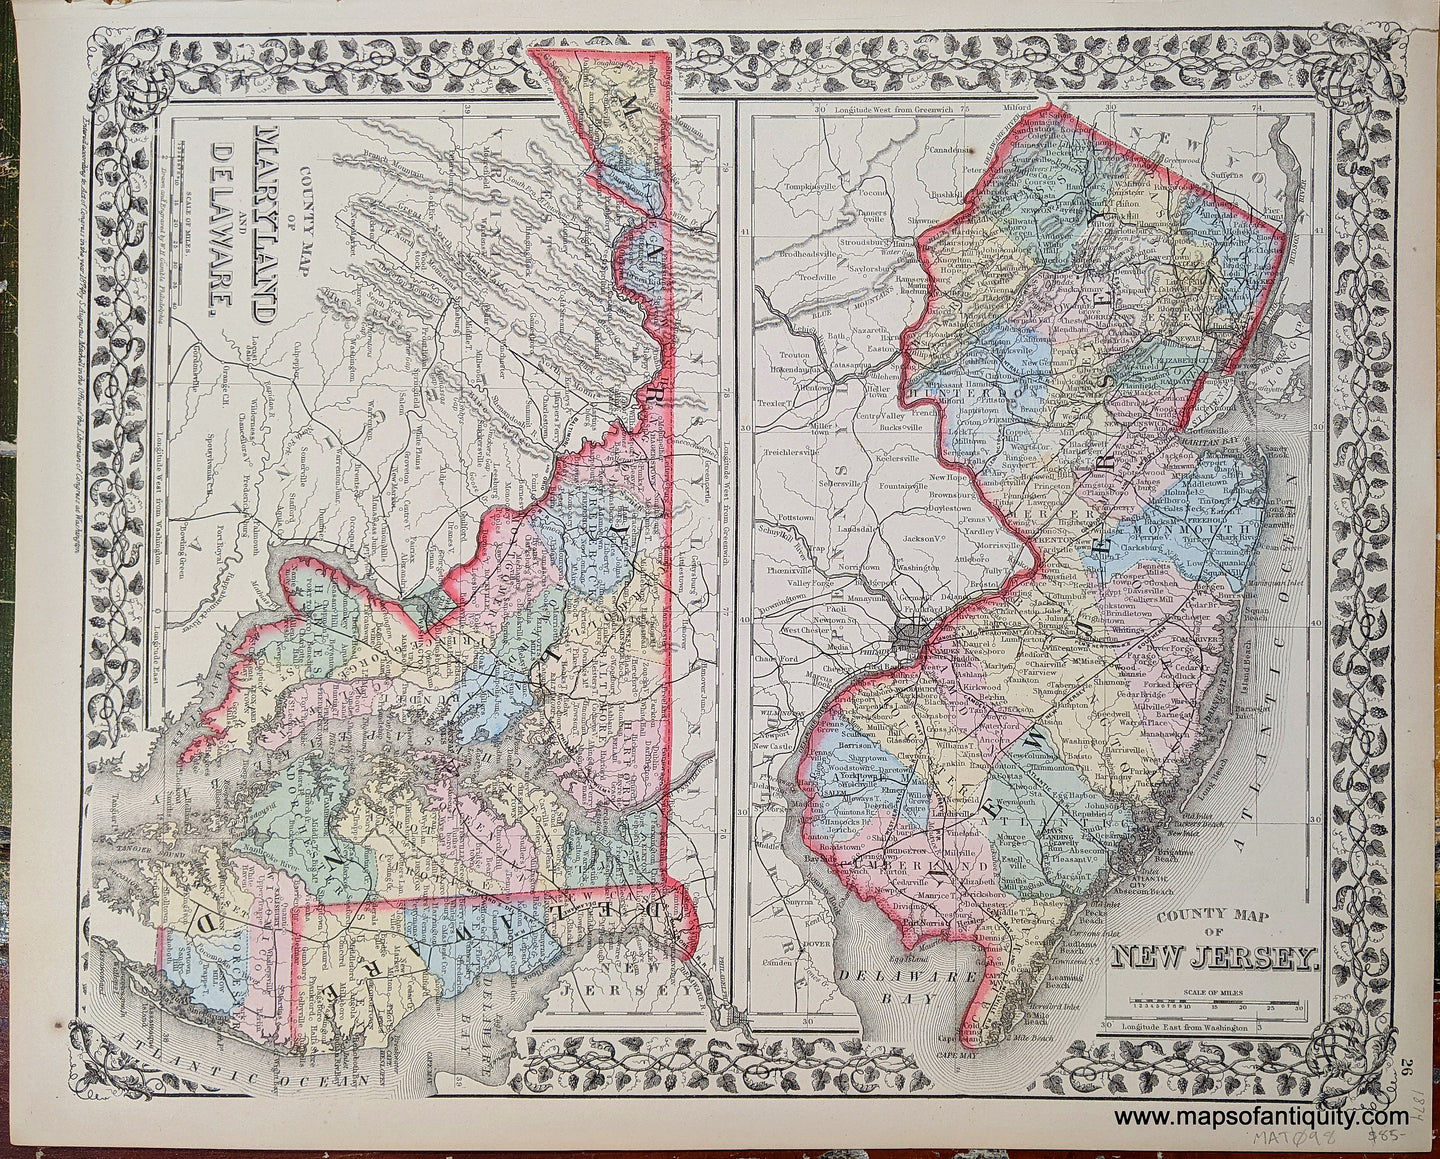 Antique-Hand-Colored-Map-County-Map-of-New-Jersey-Maryland-and-Delaware-United-States-Mid-Atlantic-1866-Mitchell-Maps-Of-Antiquity